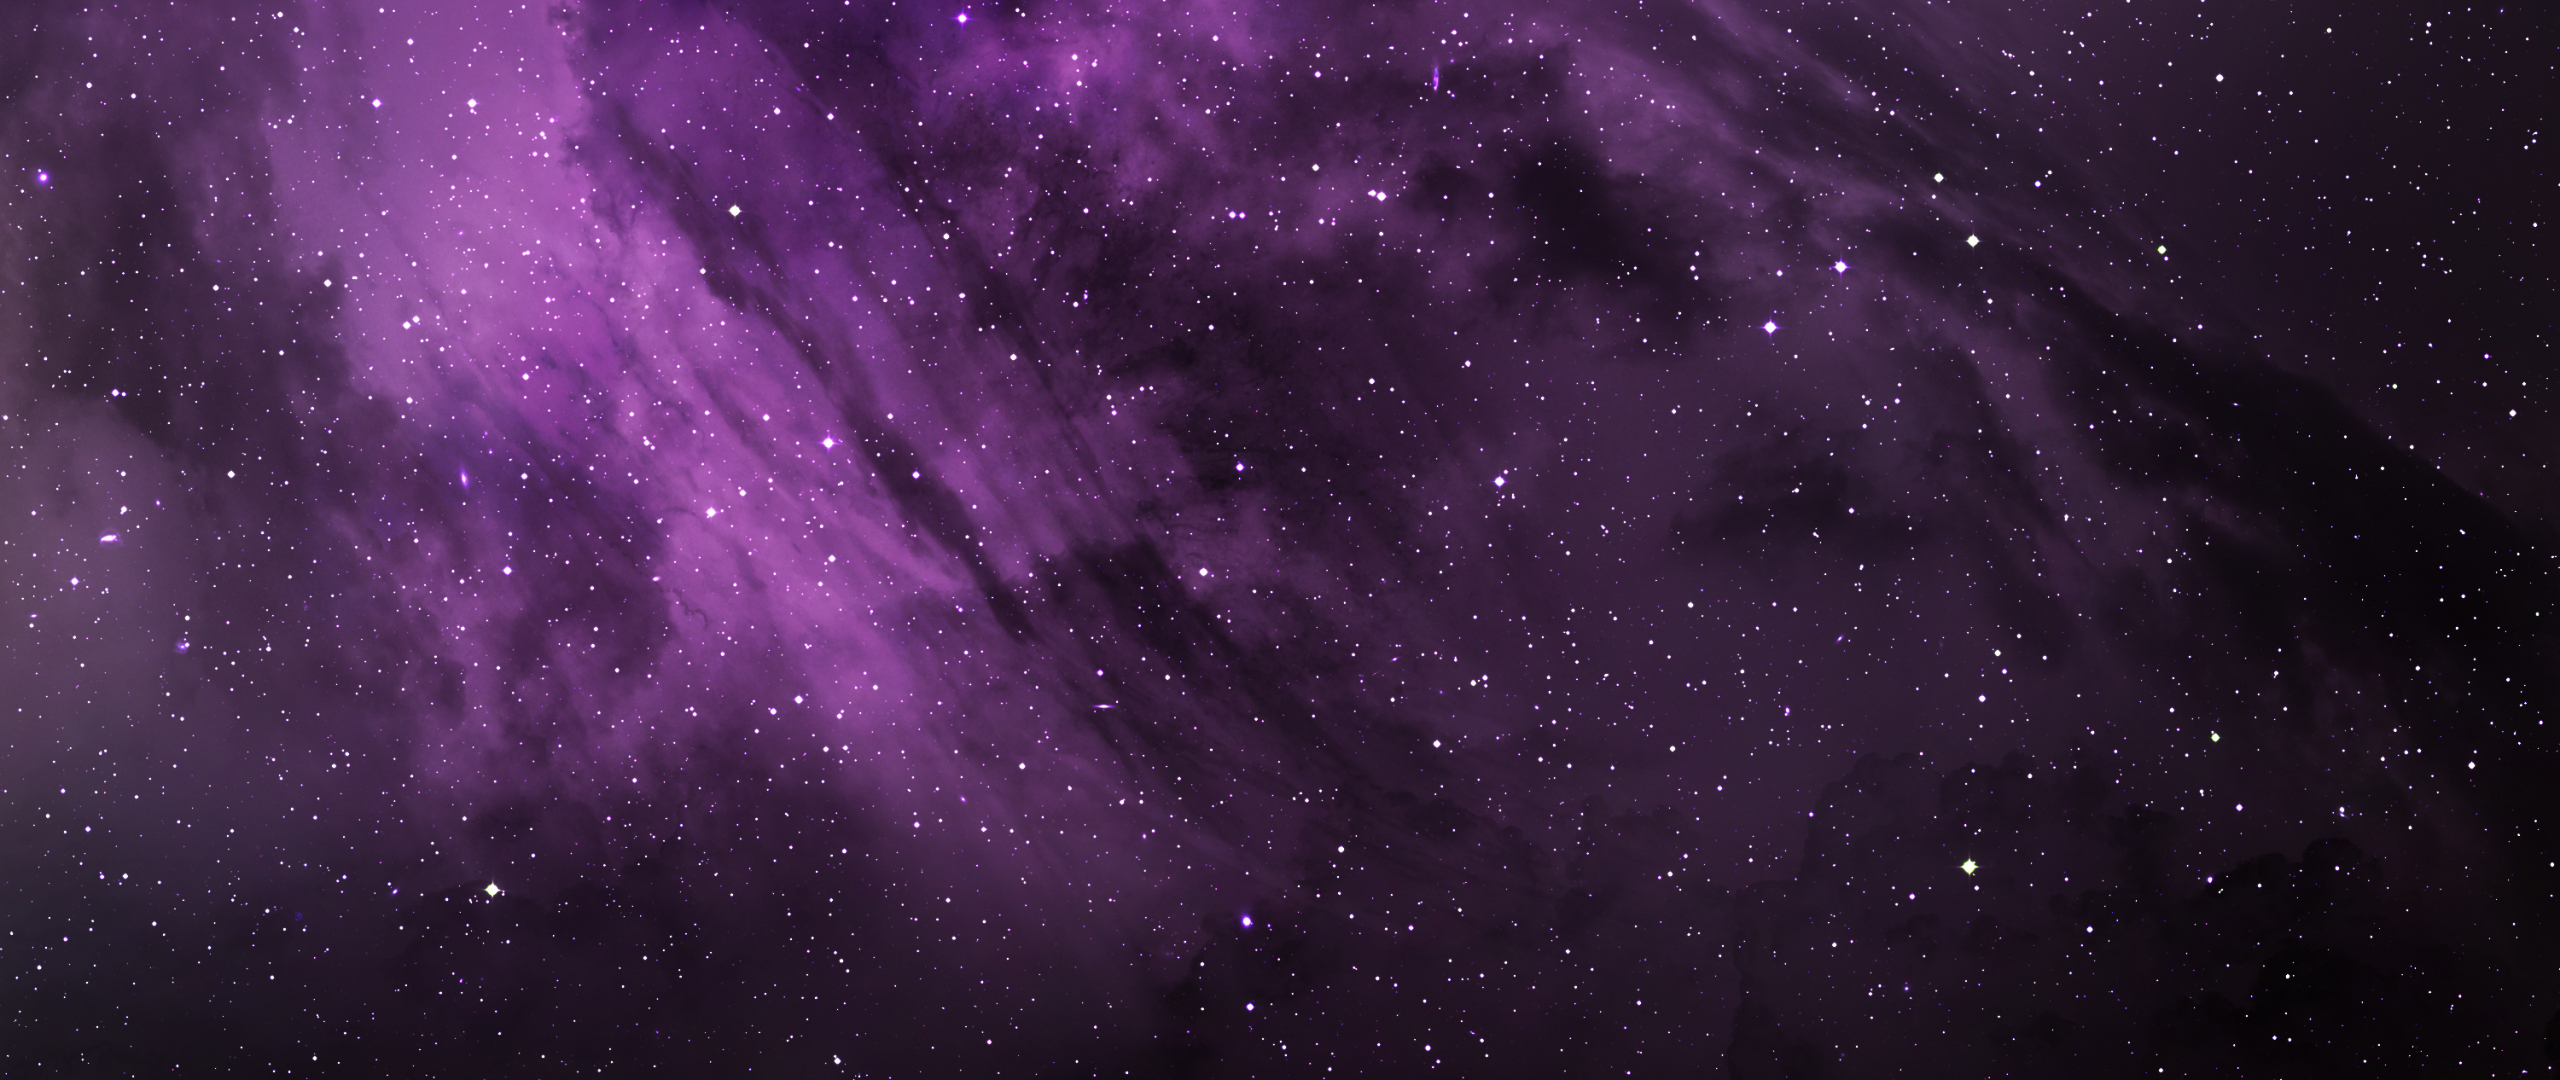 Download wallpaper 2560x1080 purple clouds, cosmos, stars, space, dual